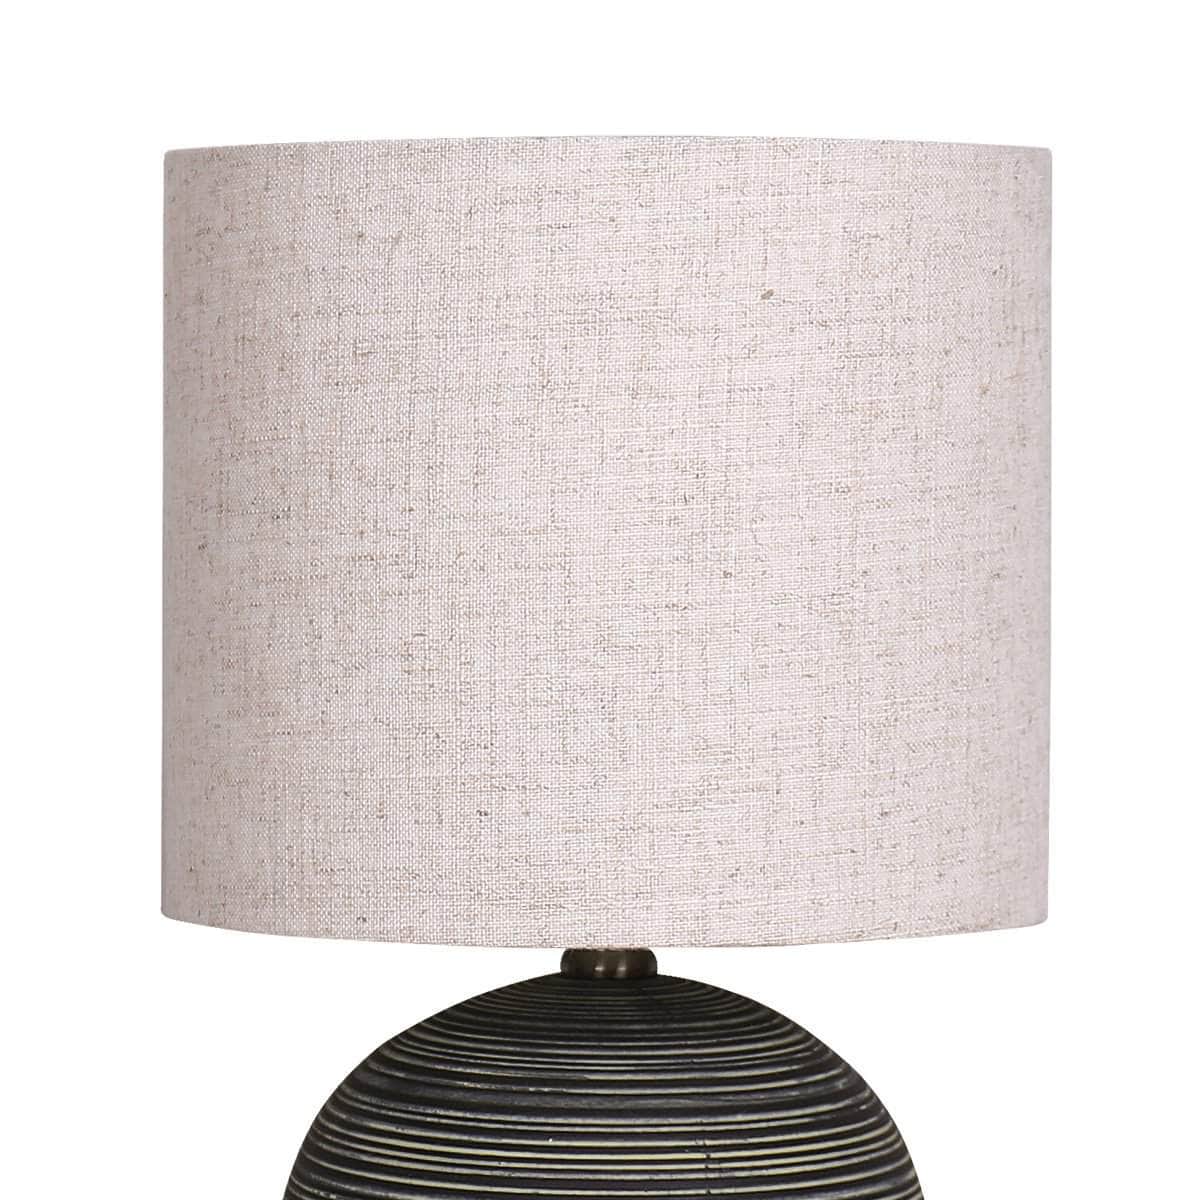 Chic Stripes Ceramic Table Lamp with Striped Pattern